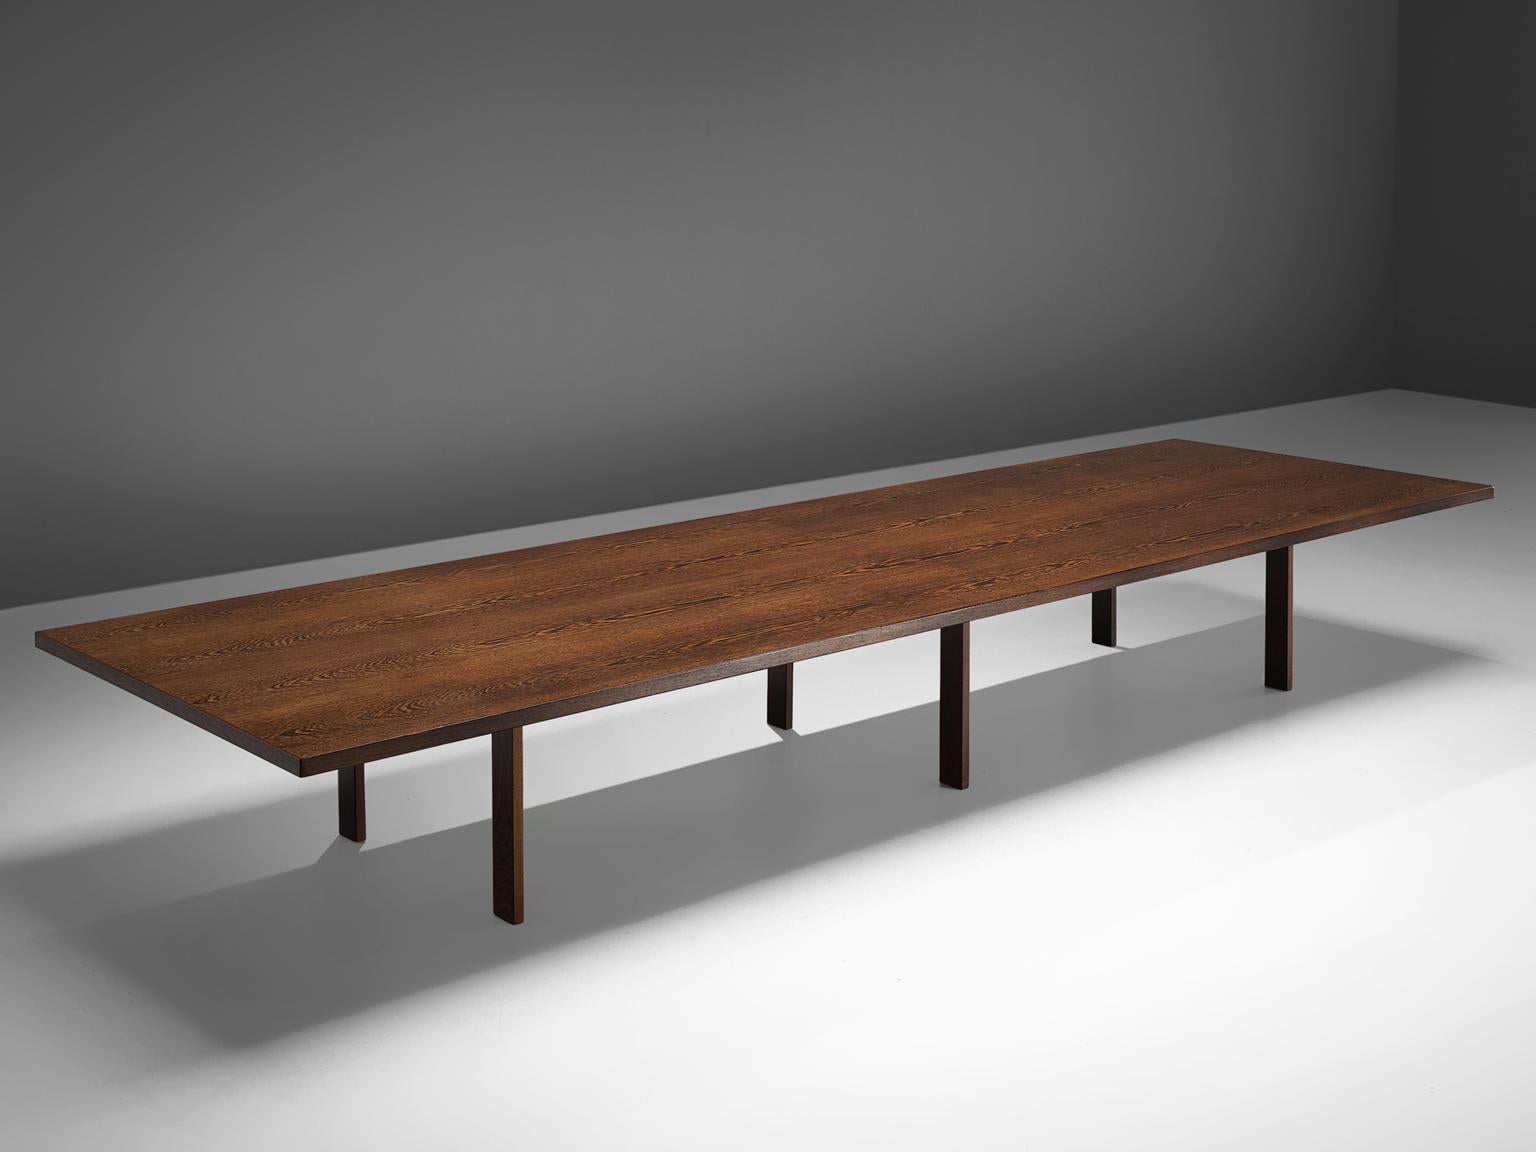 Dining or conference table, wengè, Denmark, 1960s.

This unique Minimalist, modest table is completely executed in wengé. The top shows a bookmatched wengé veneer, resulting in a jaw dropping pattern of natural flames of the tropical wengé. This